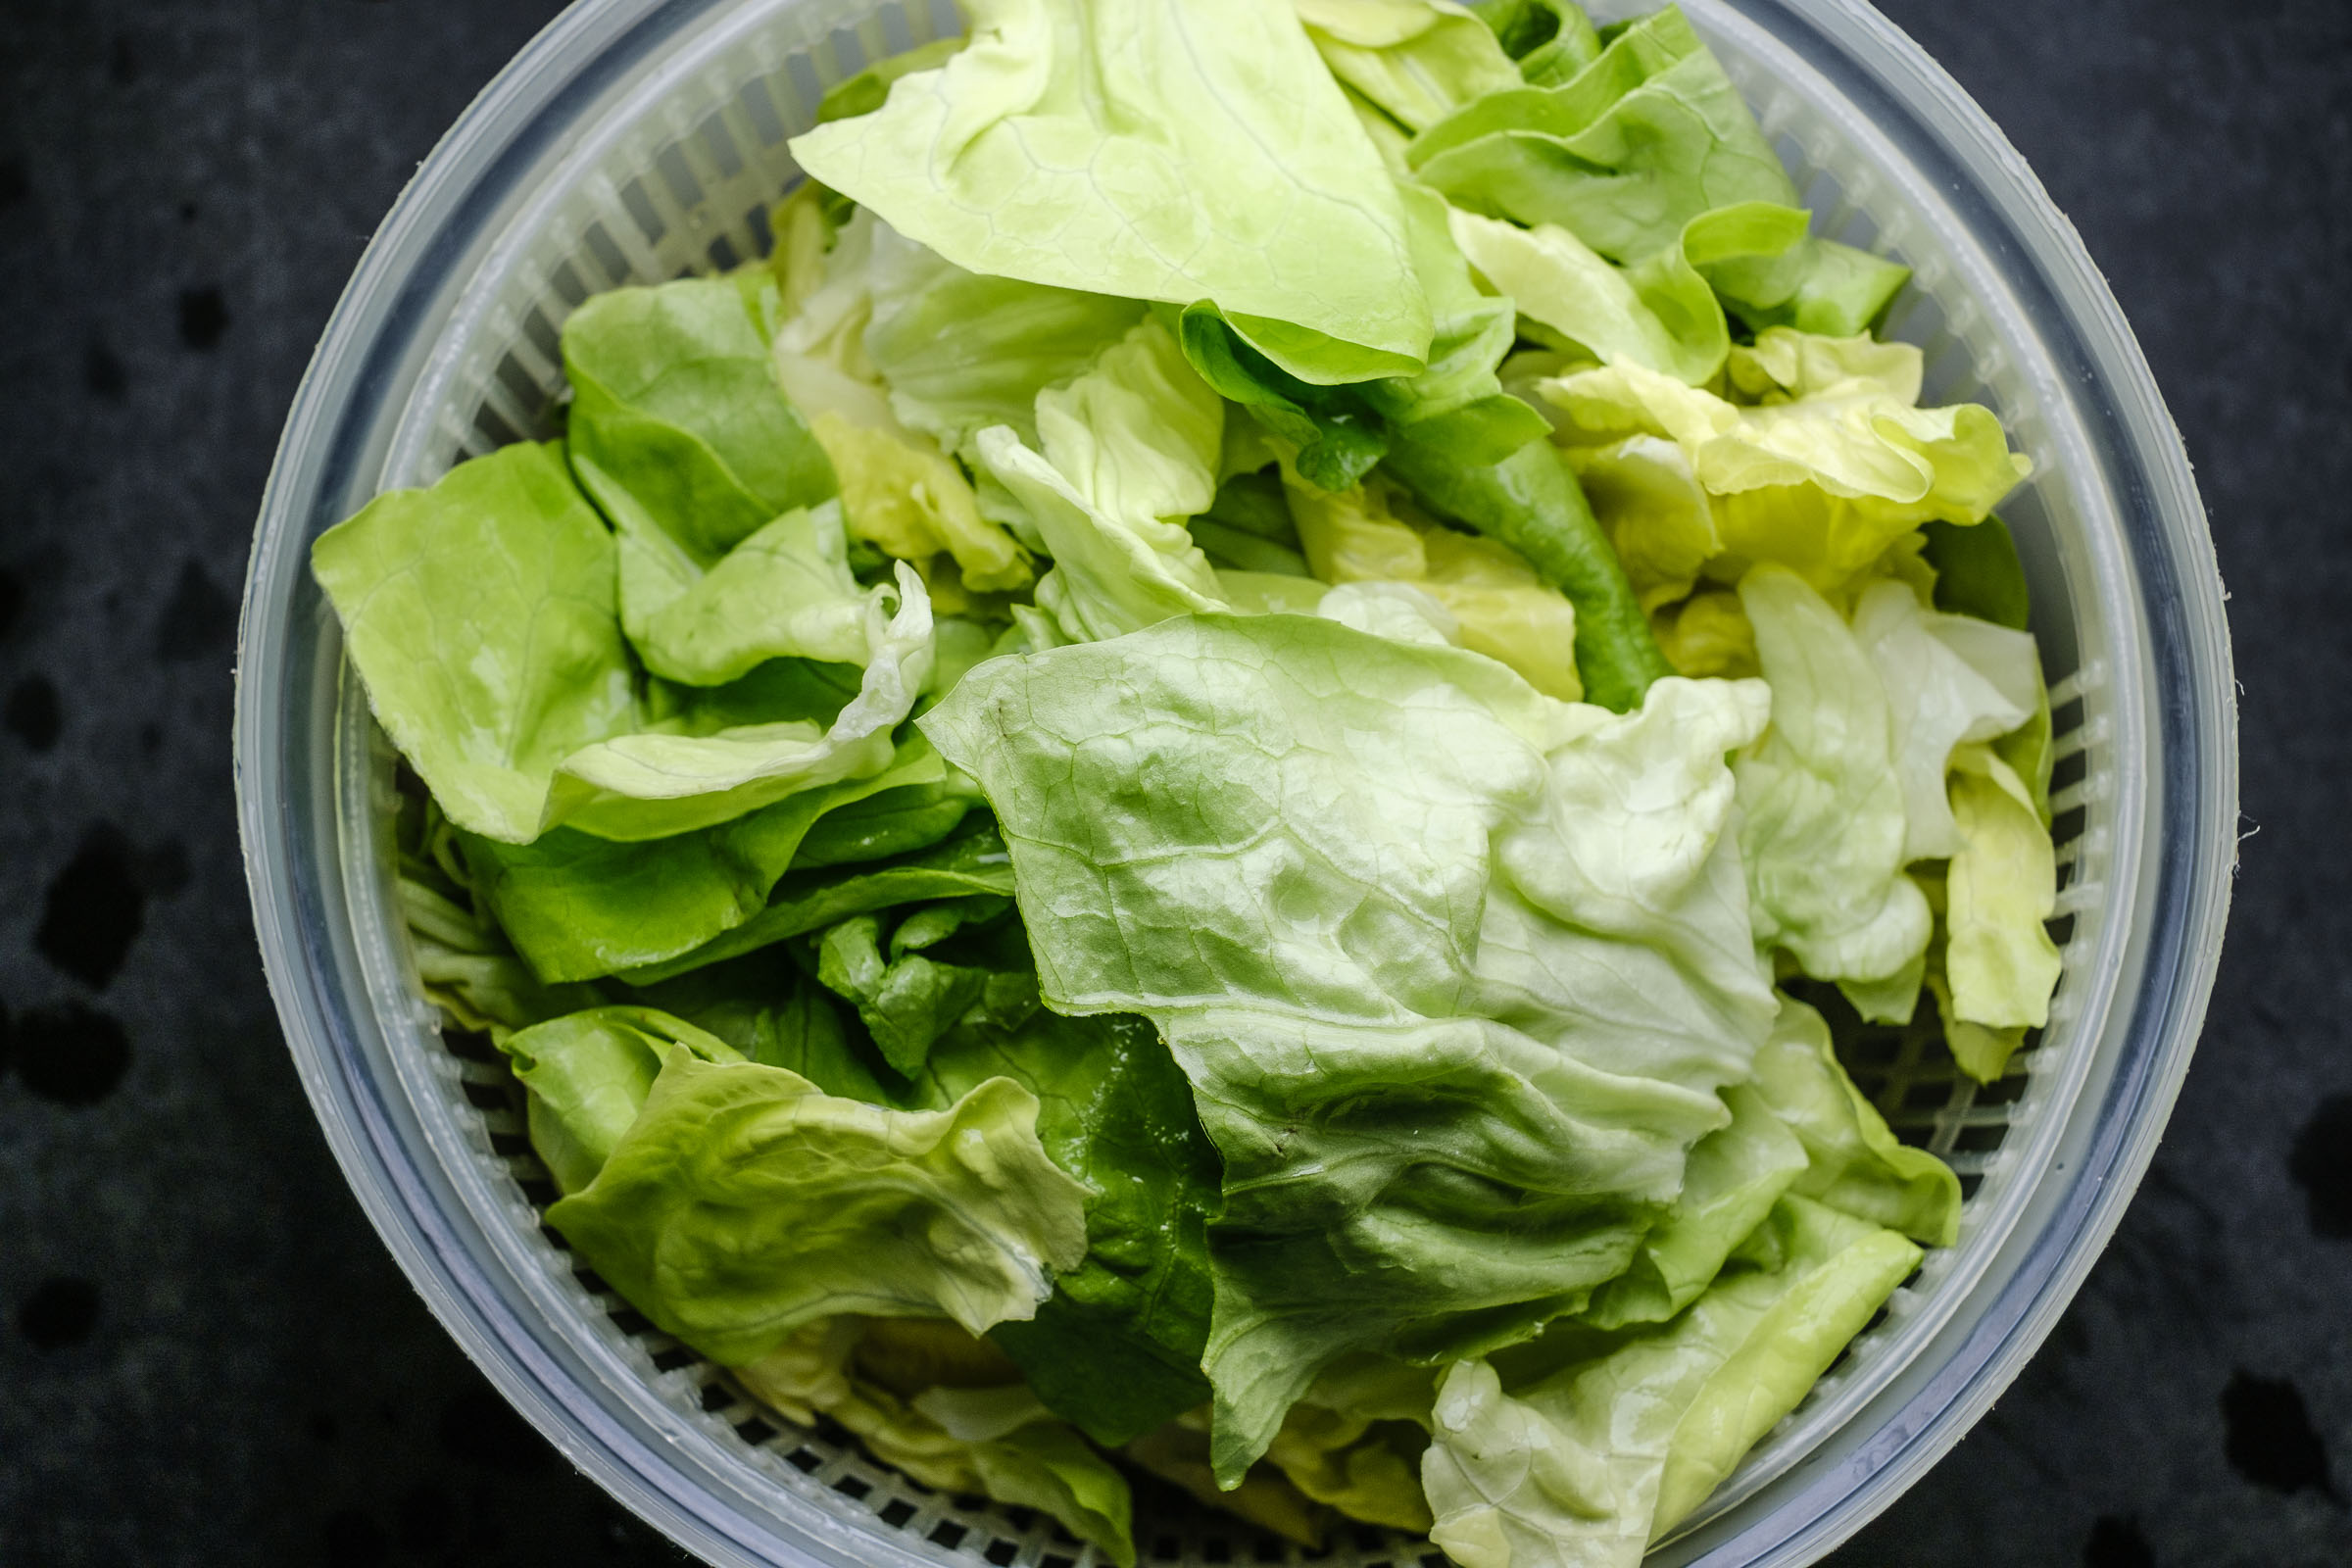 Place washed, wet lettuce leaves in the salad spinner